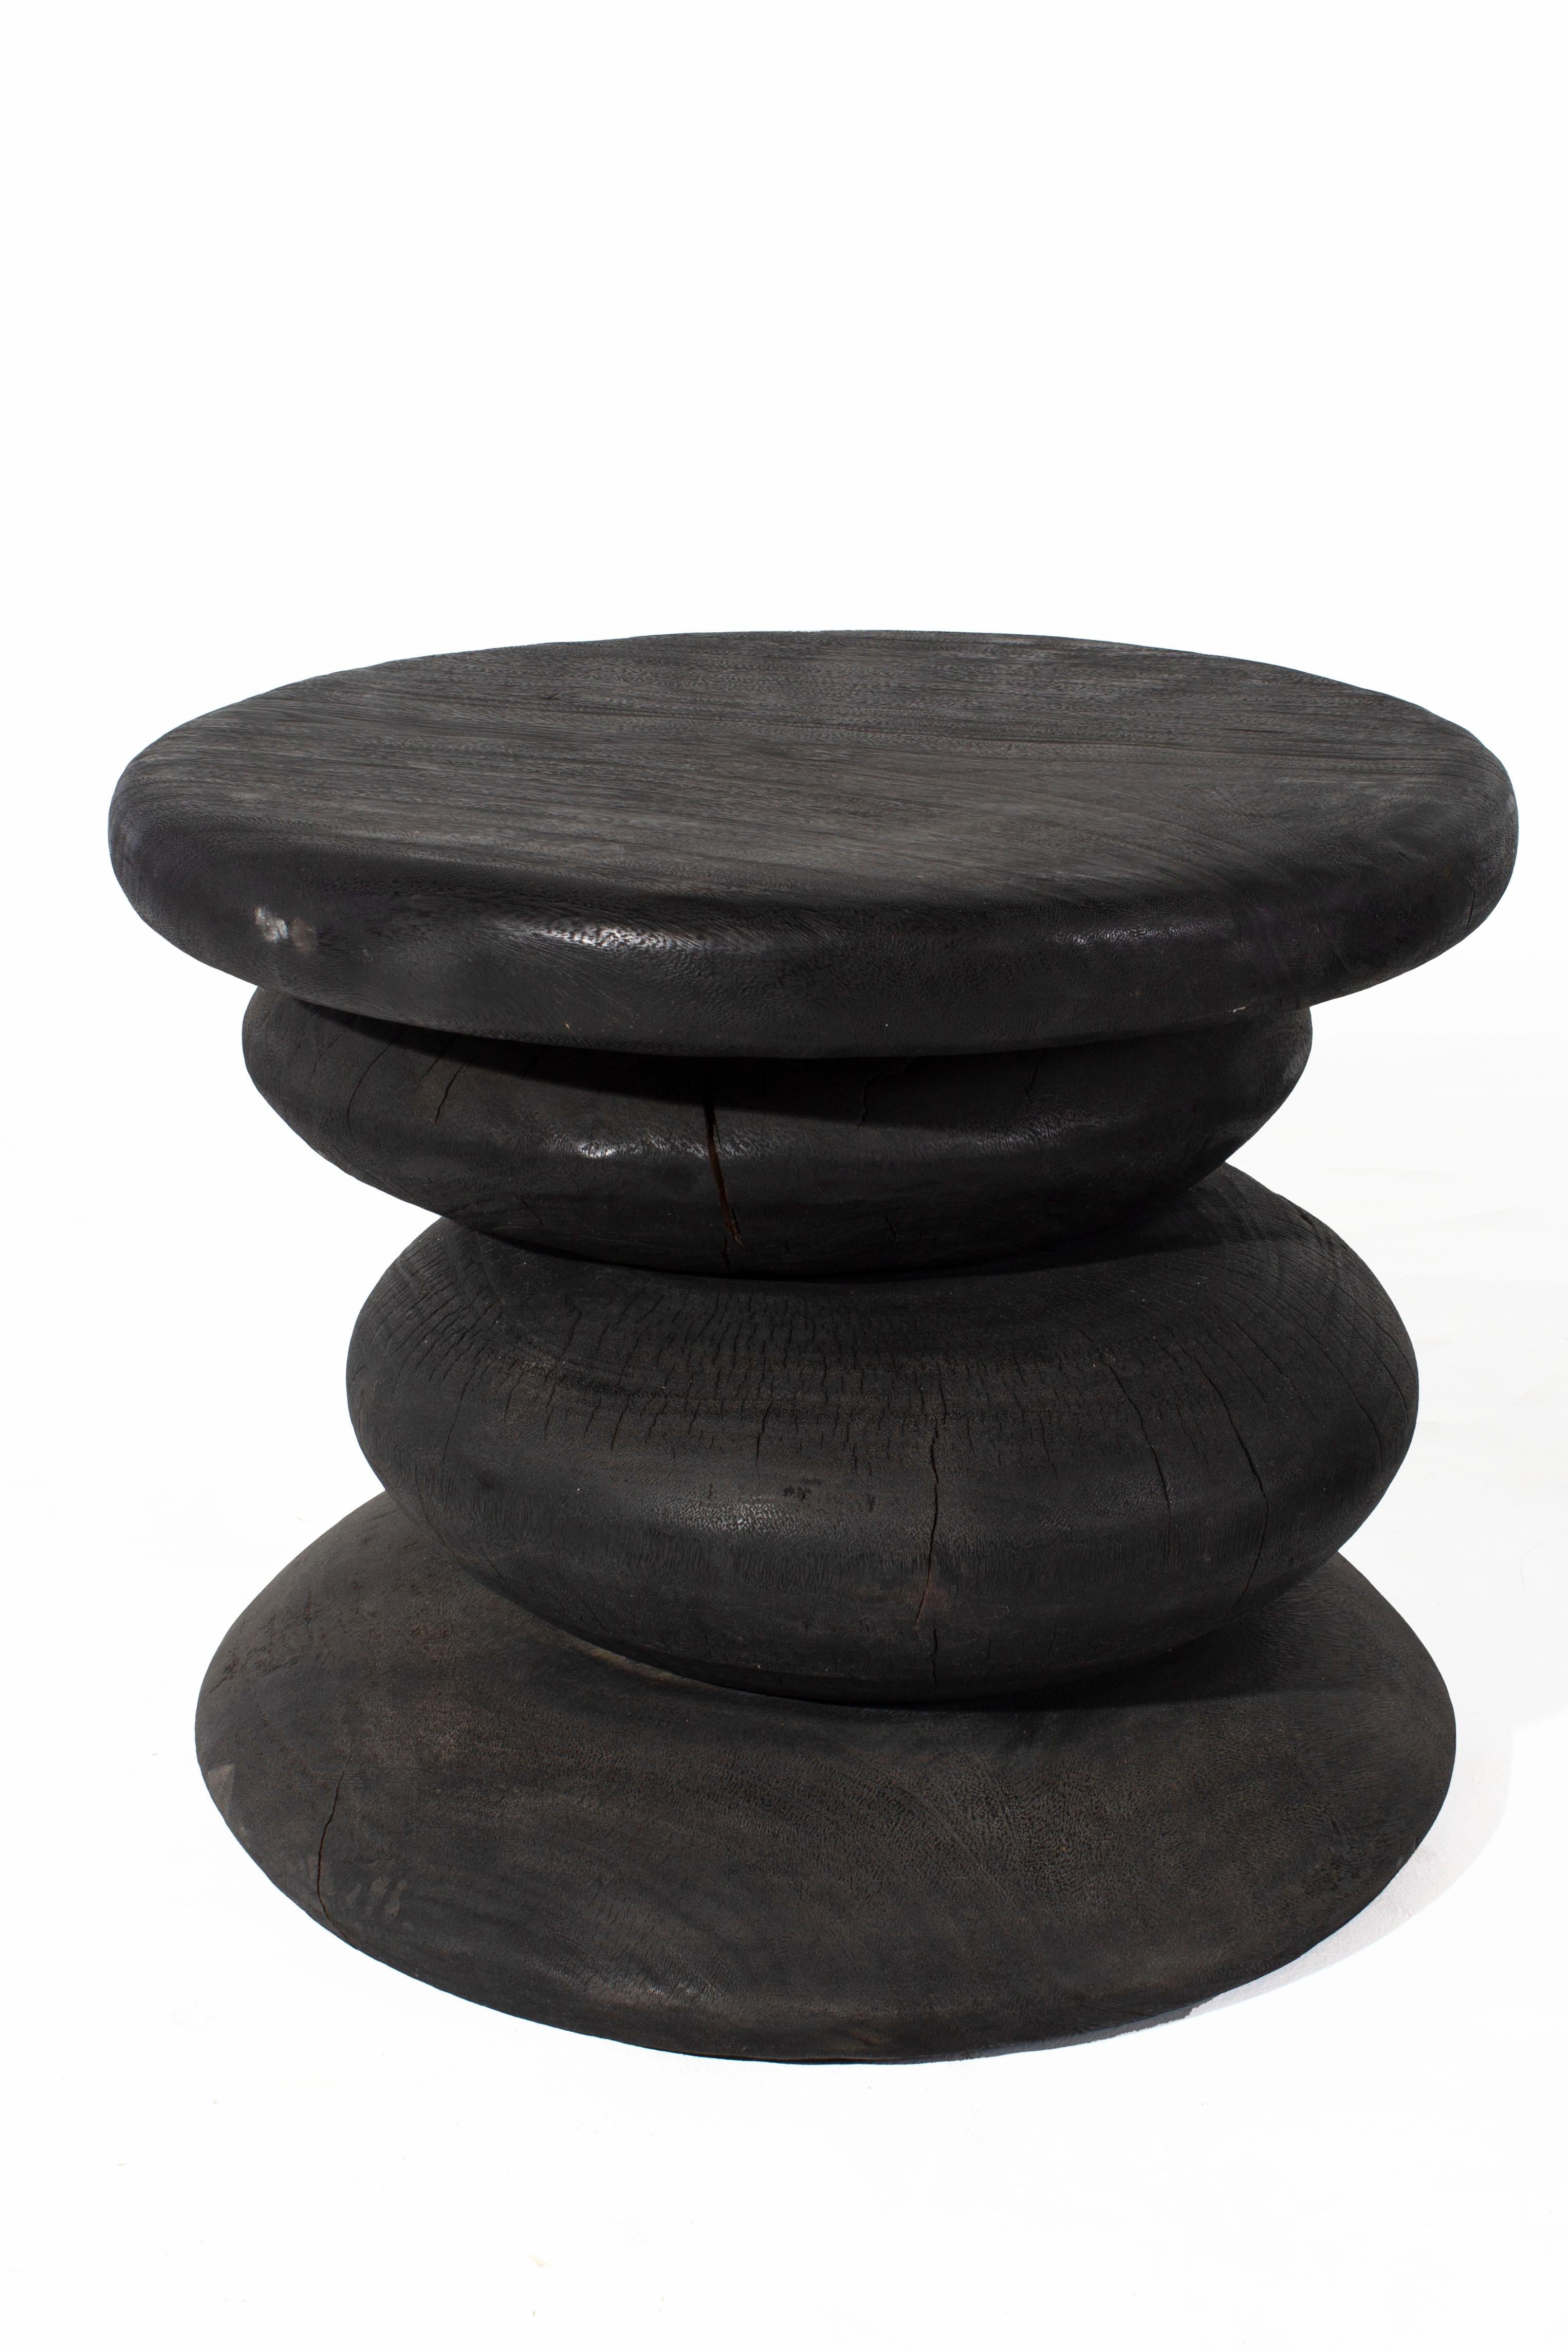 Ebonized teak drum style end table with off set circle design.

2 available, both vary in shape and are not identical.